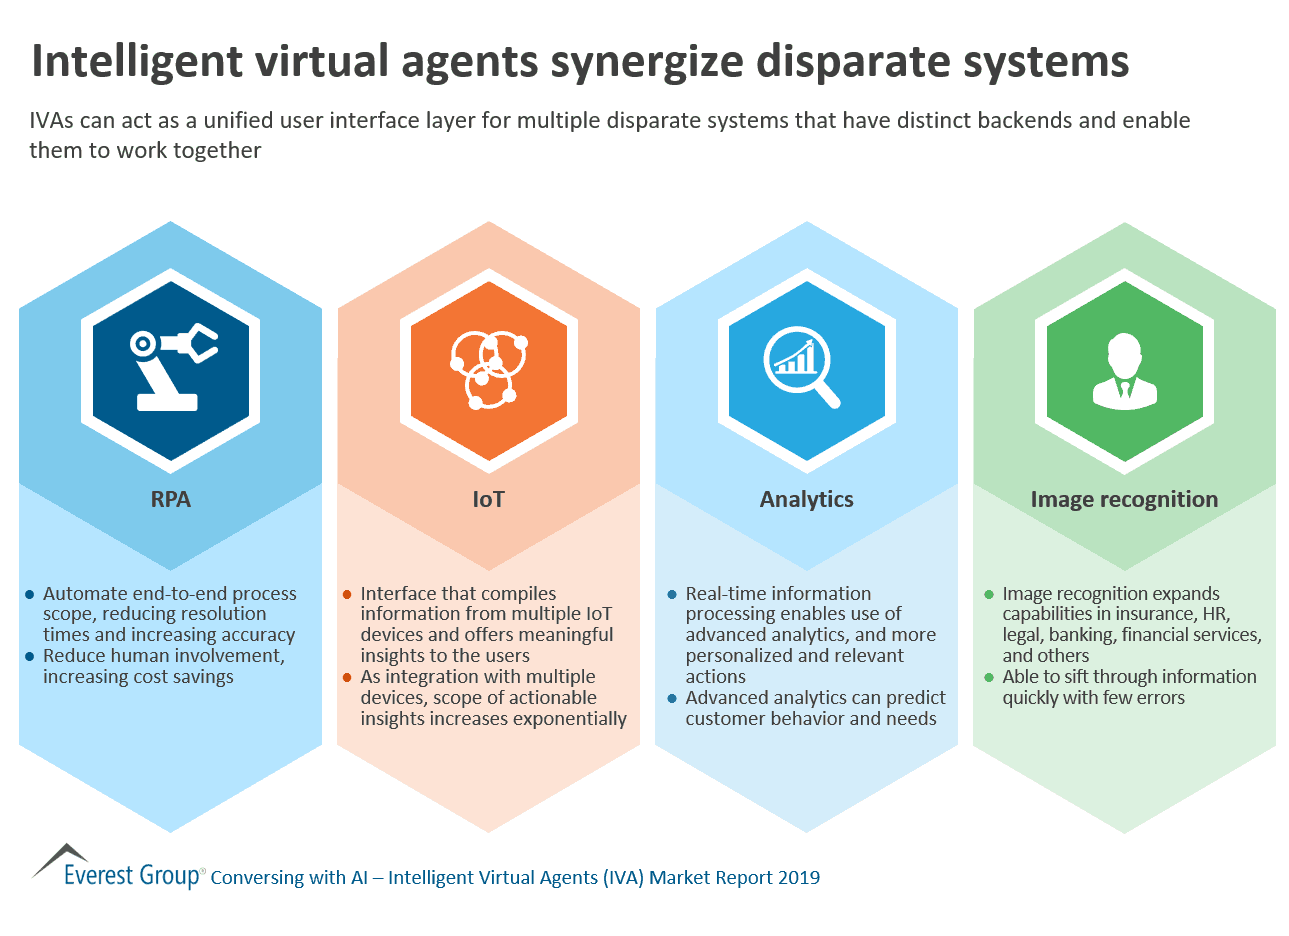 Intelligent virtual agents synergize systems